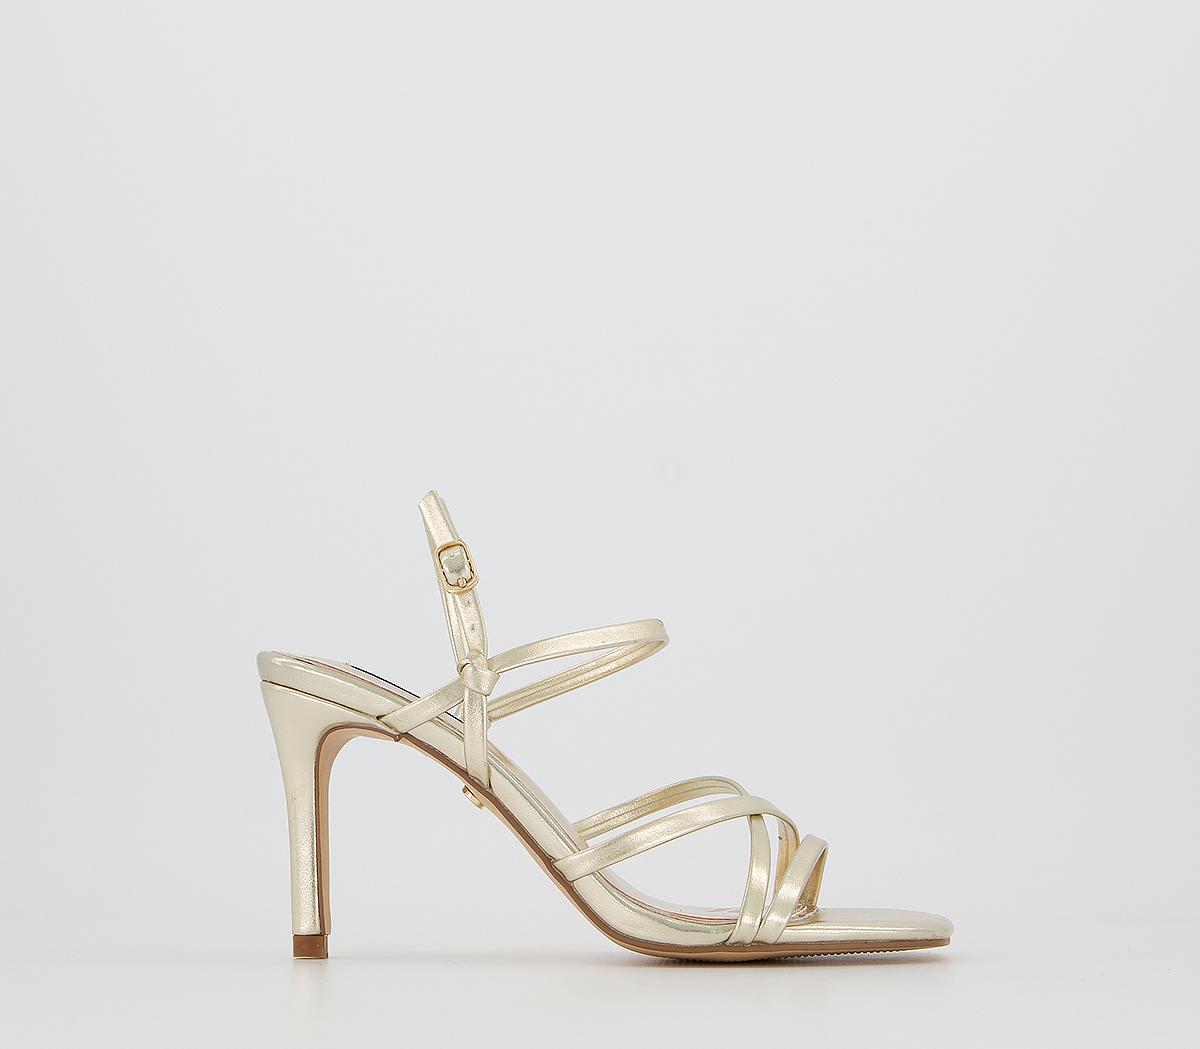 OFFICEMissy Strappy SandalsGold